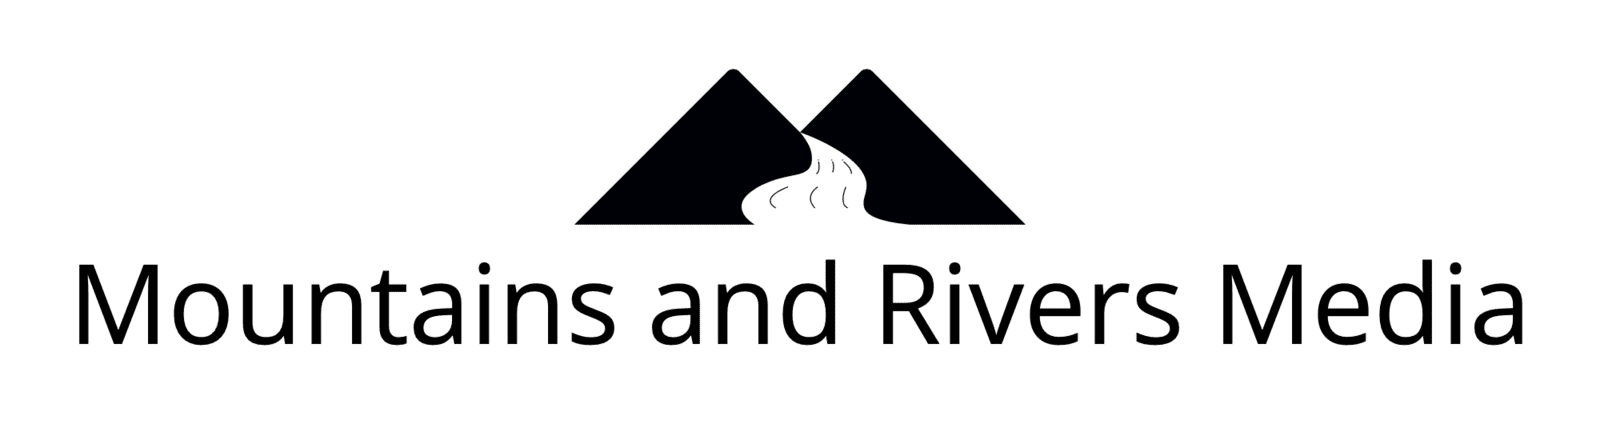 Mountains and Rivers Media®